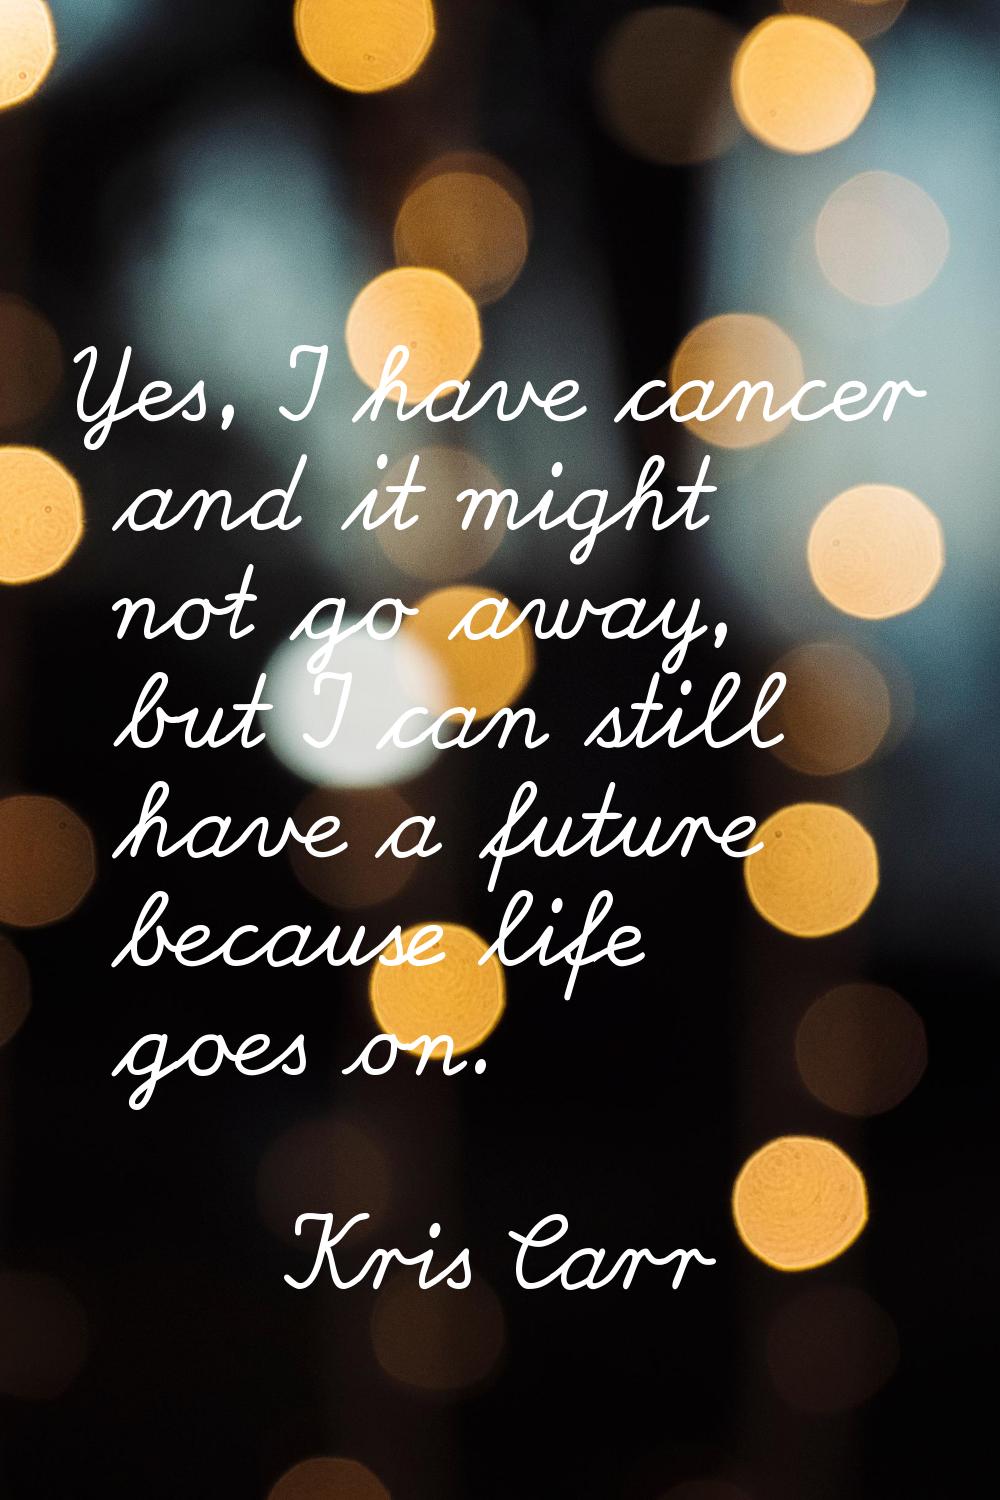 Yes, I have cancer and it might not go away, but I can still have a future because life goes on.